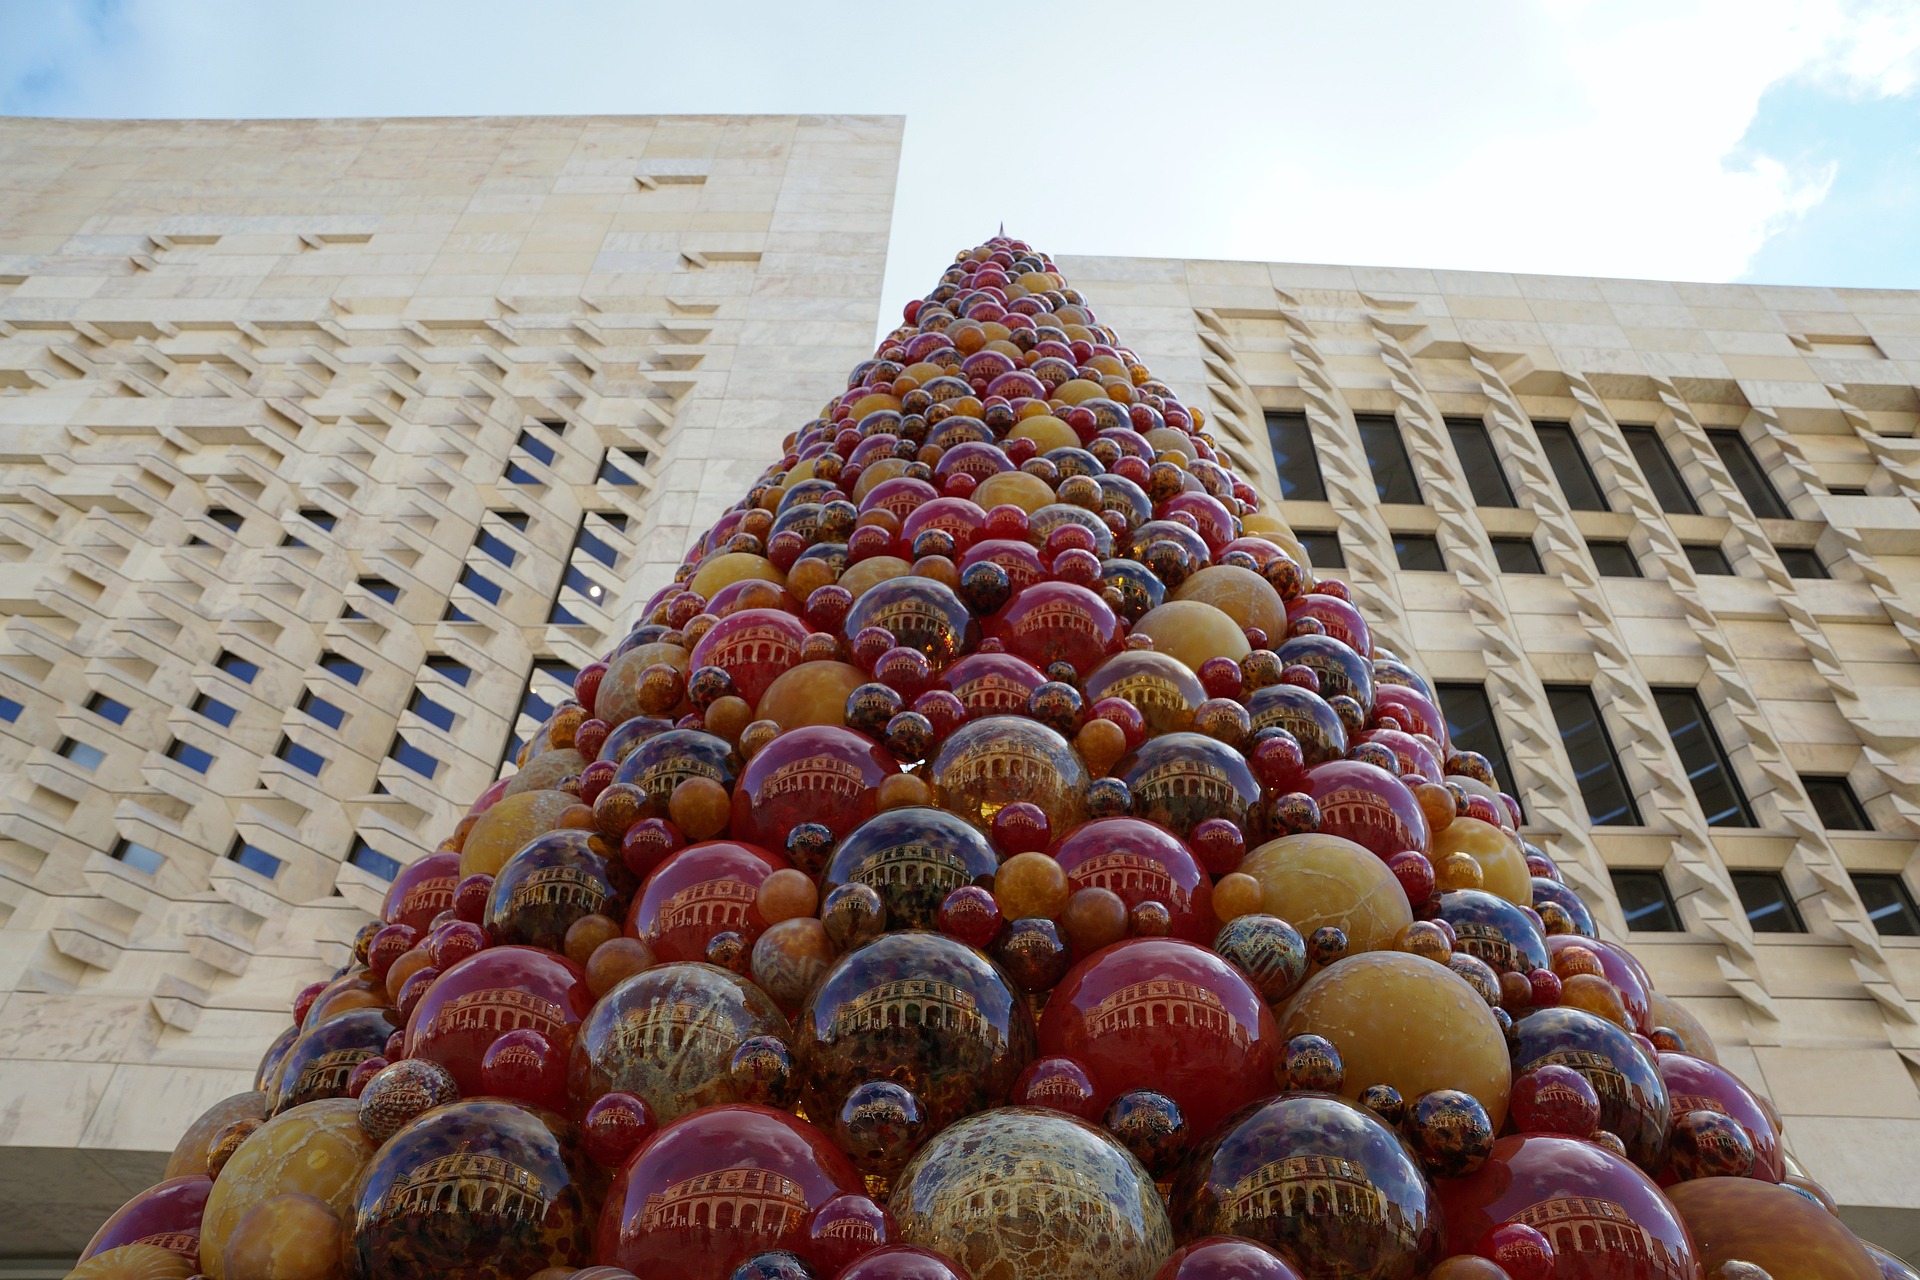 Learn all about the unique Christmas traditions in Malta in this handy guide!